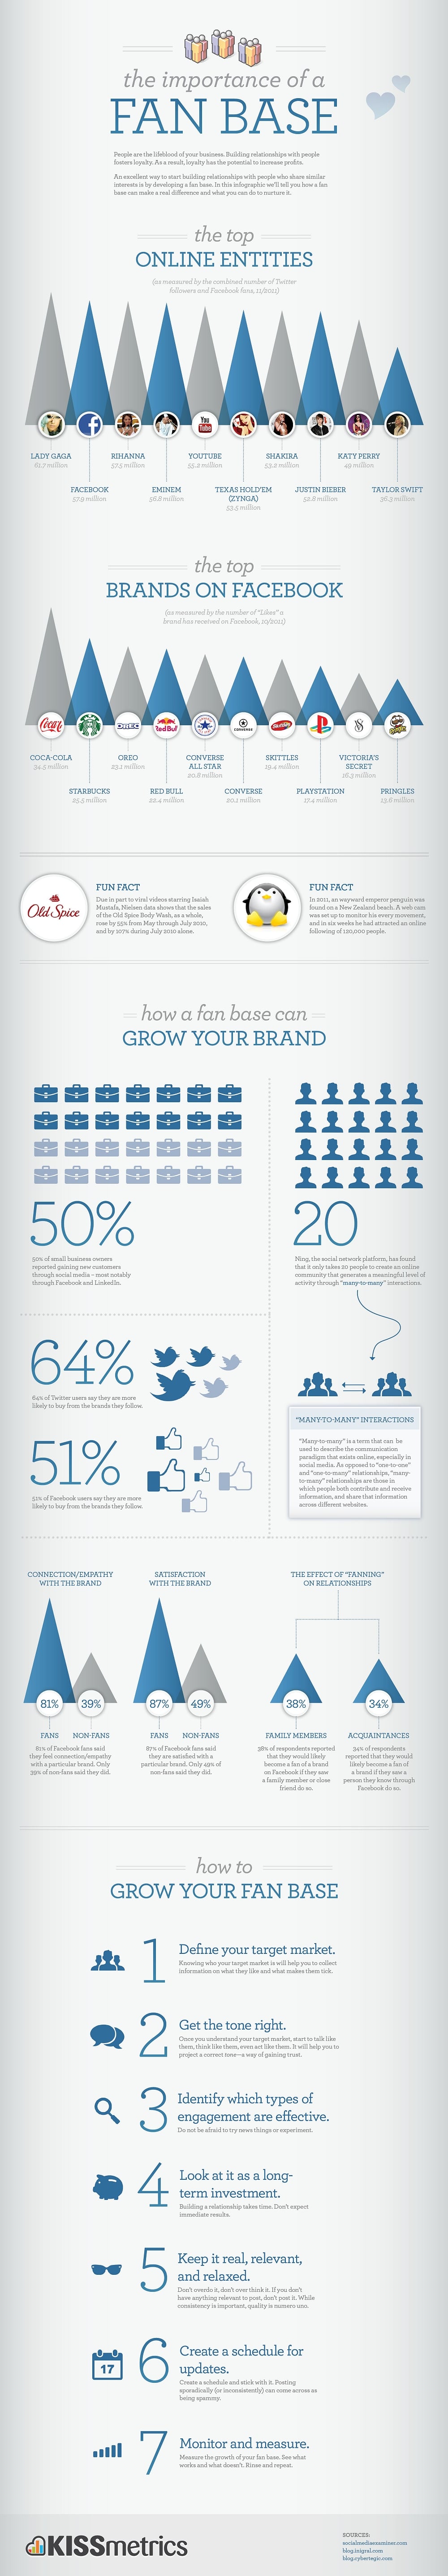 7 Ways To Grow Your Fan Base On Facebook [Infographic]